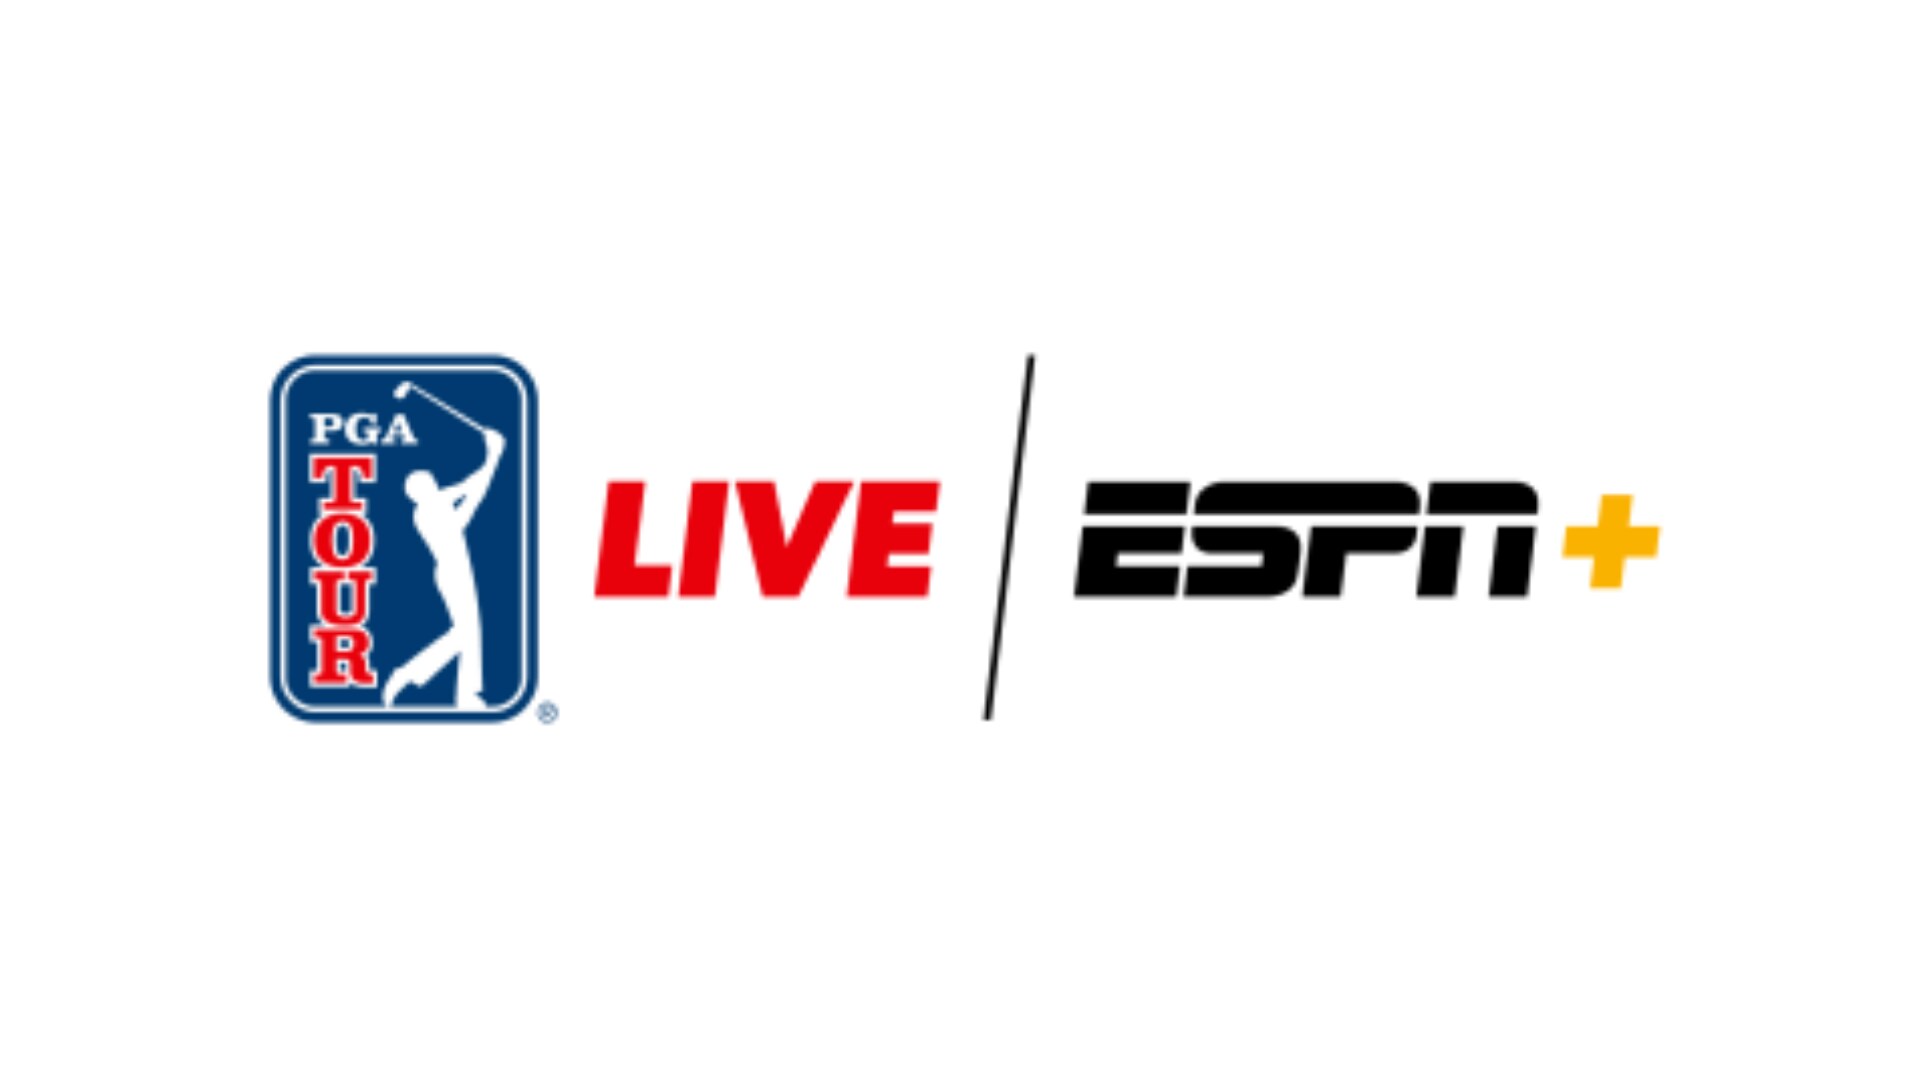 Exclusively on PGA TOUR LIVE on ESPN+: Four Concurrent Streams Covering The American Express at PGA West in La Quinta, Calif.